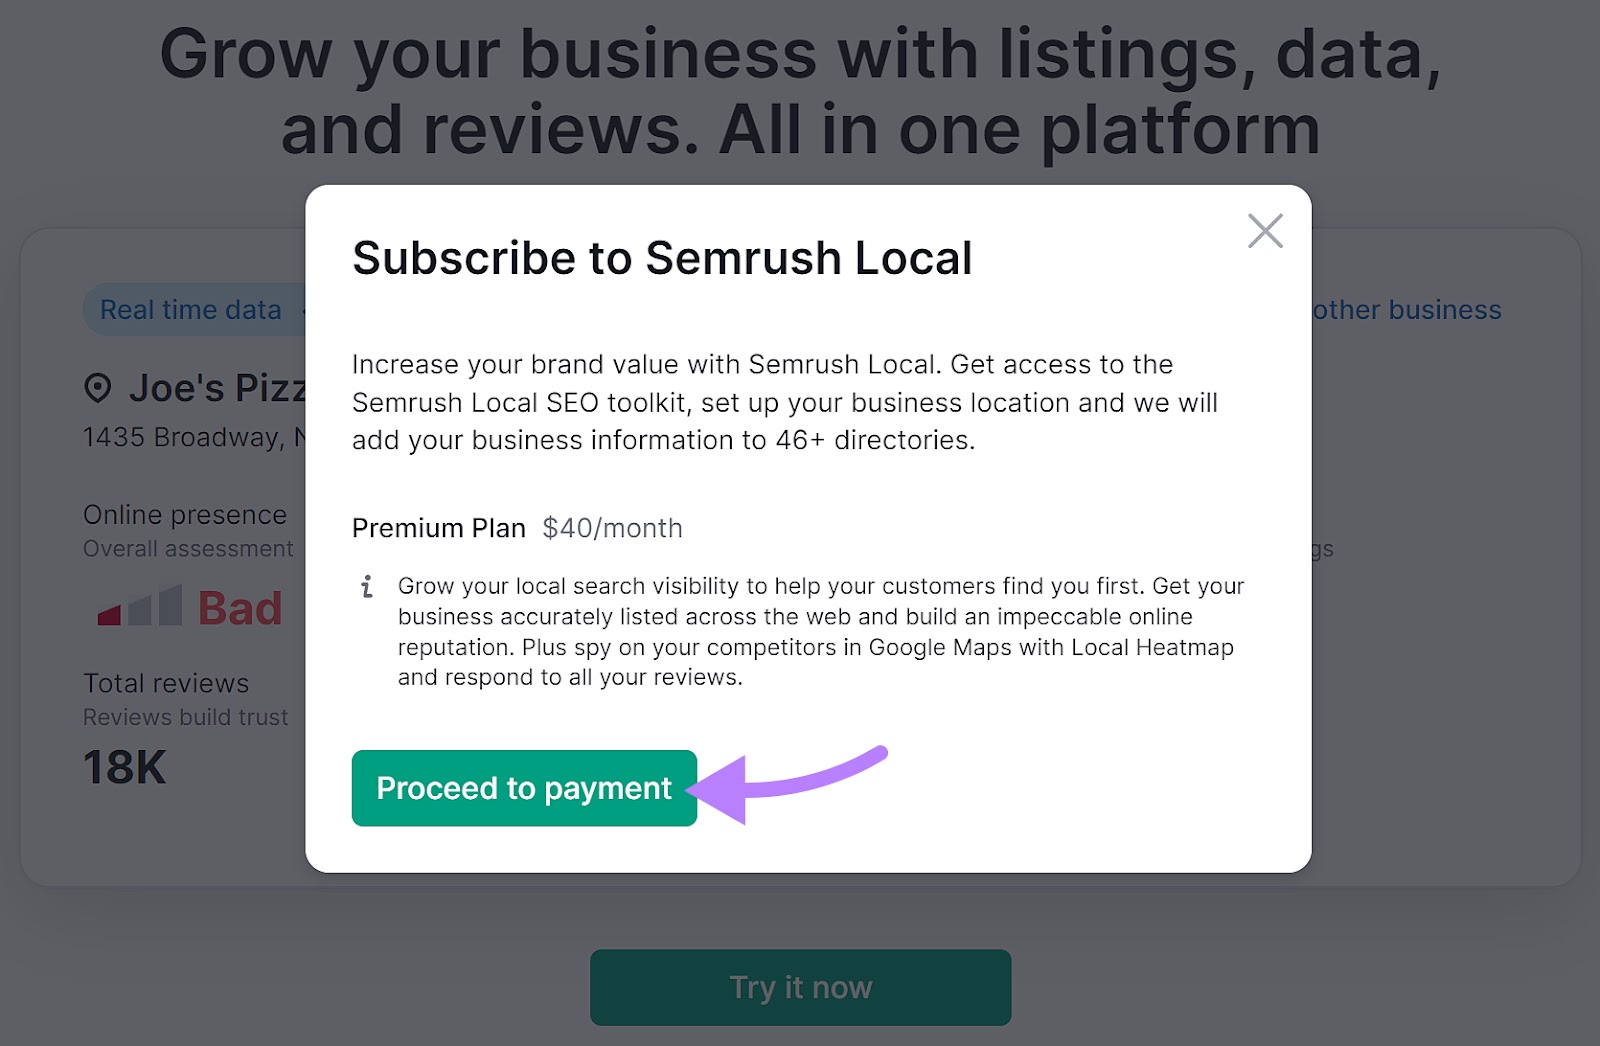 Pop-up showing the Semrush Local statement  and pricing plan. "Proceed to payment" fastener  is highlighted.